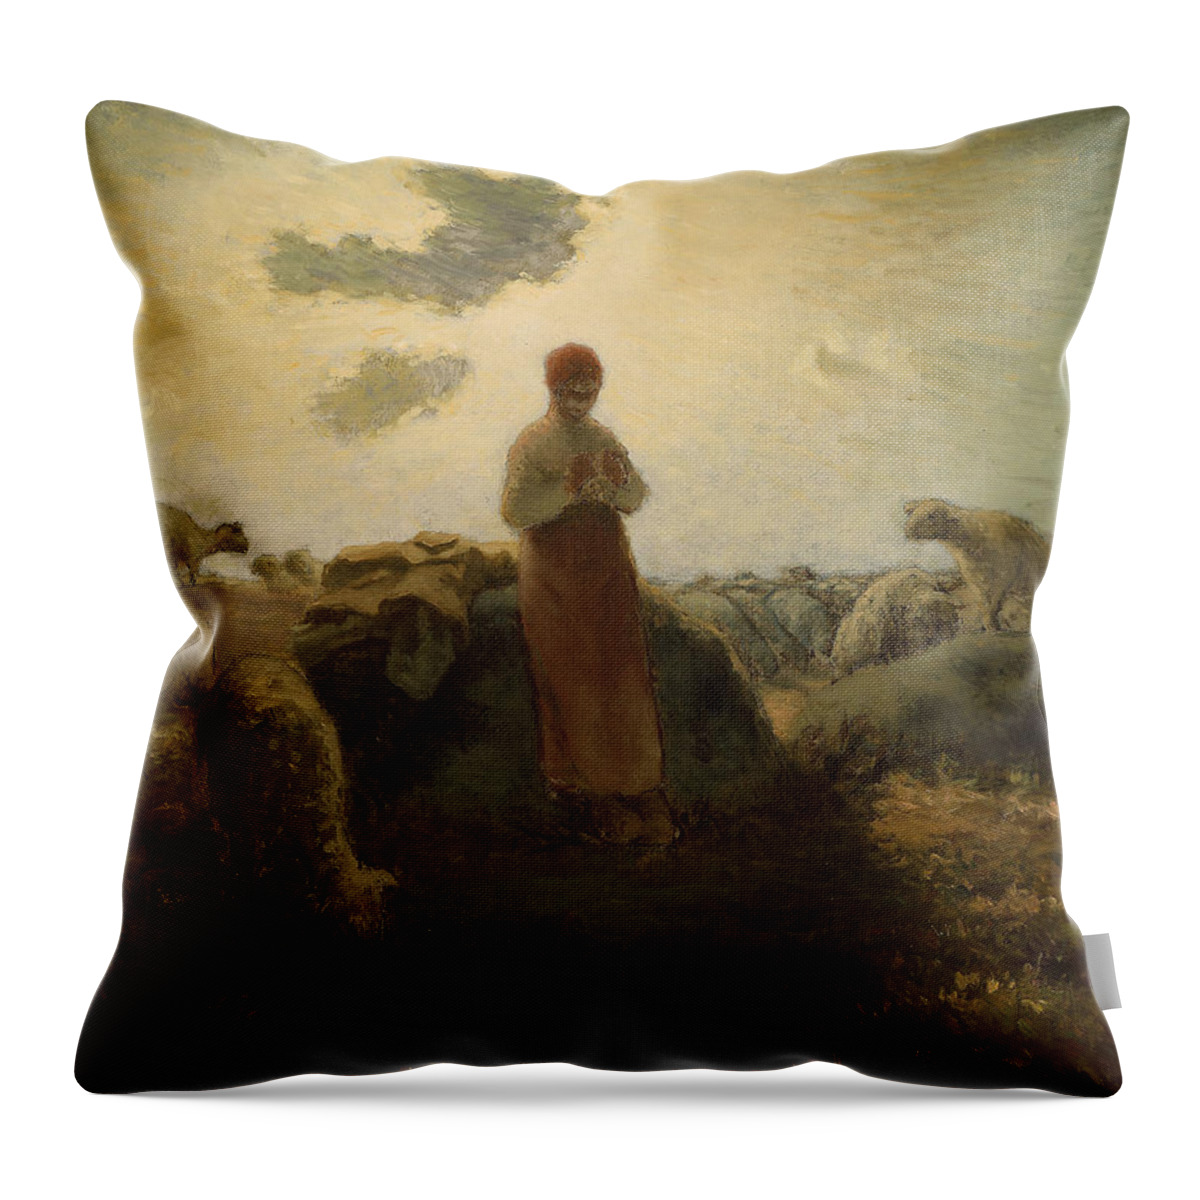 19th Century Artists Throw Pillow featuring the painting The Keeper of the Herd by Jean-Francois Millet